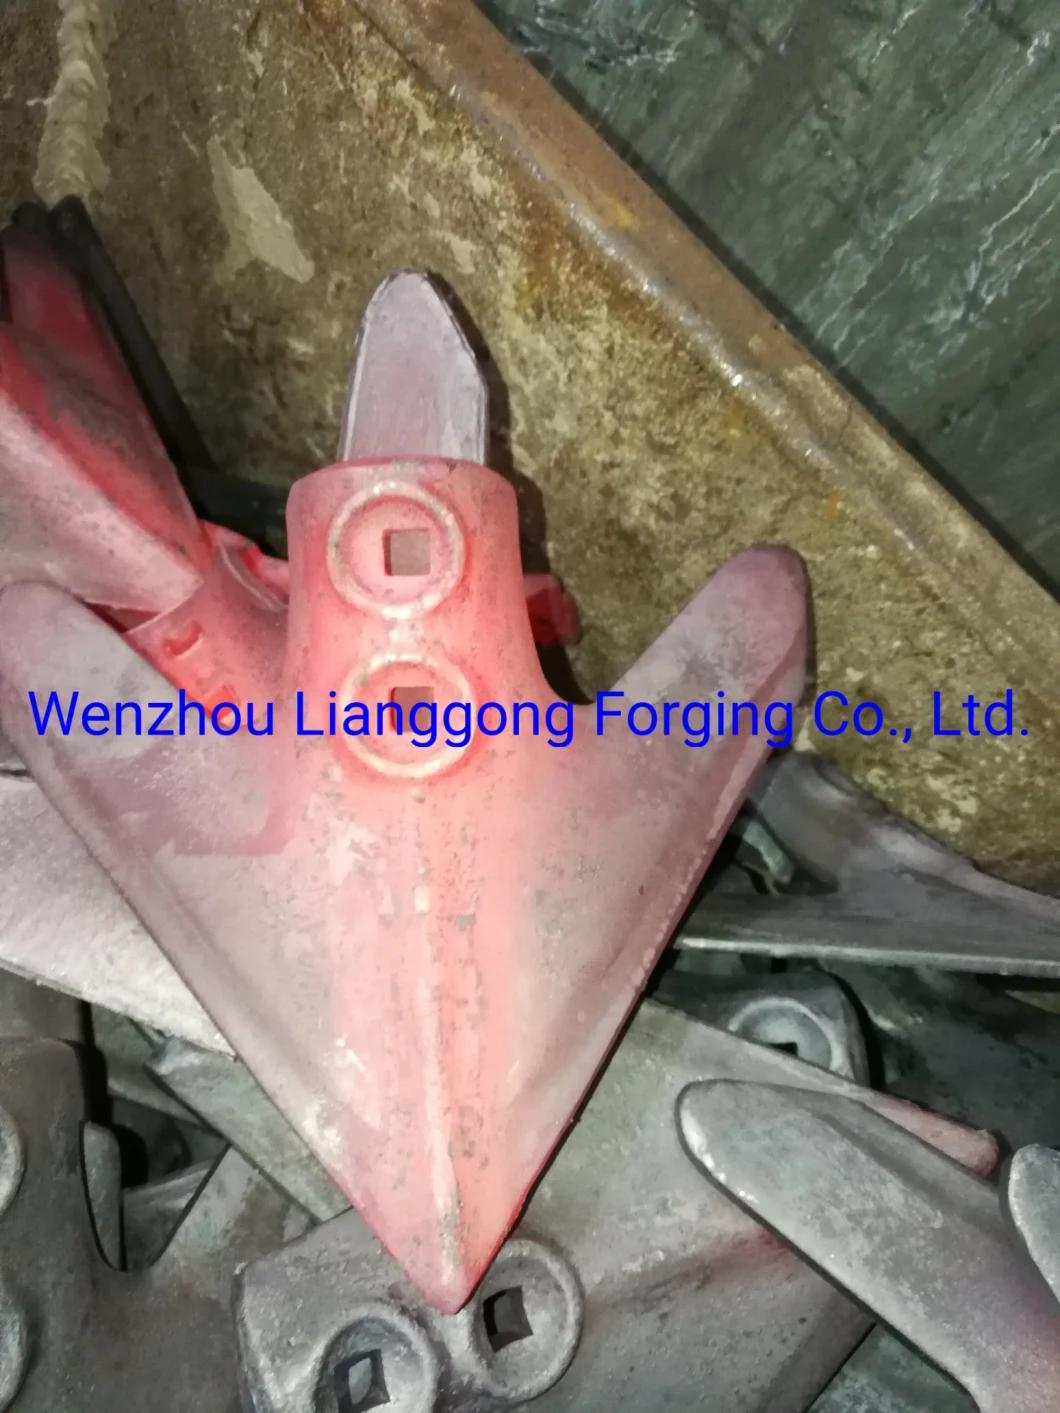 Undercarriage Drive Sprocket Used in Excavator